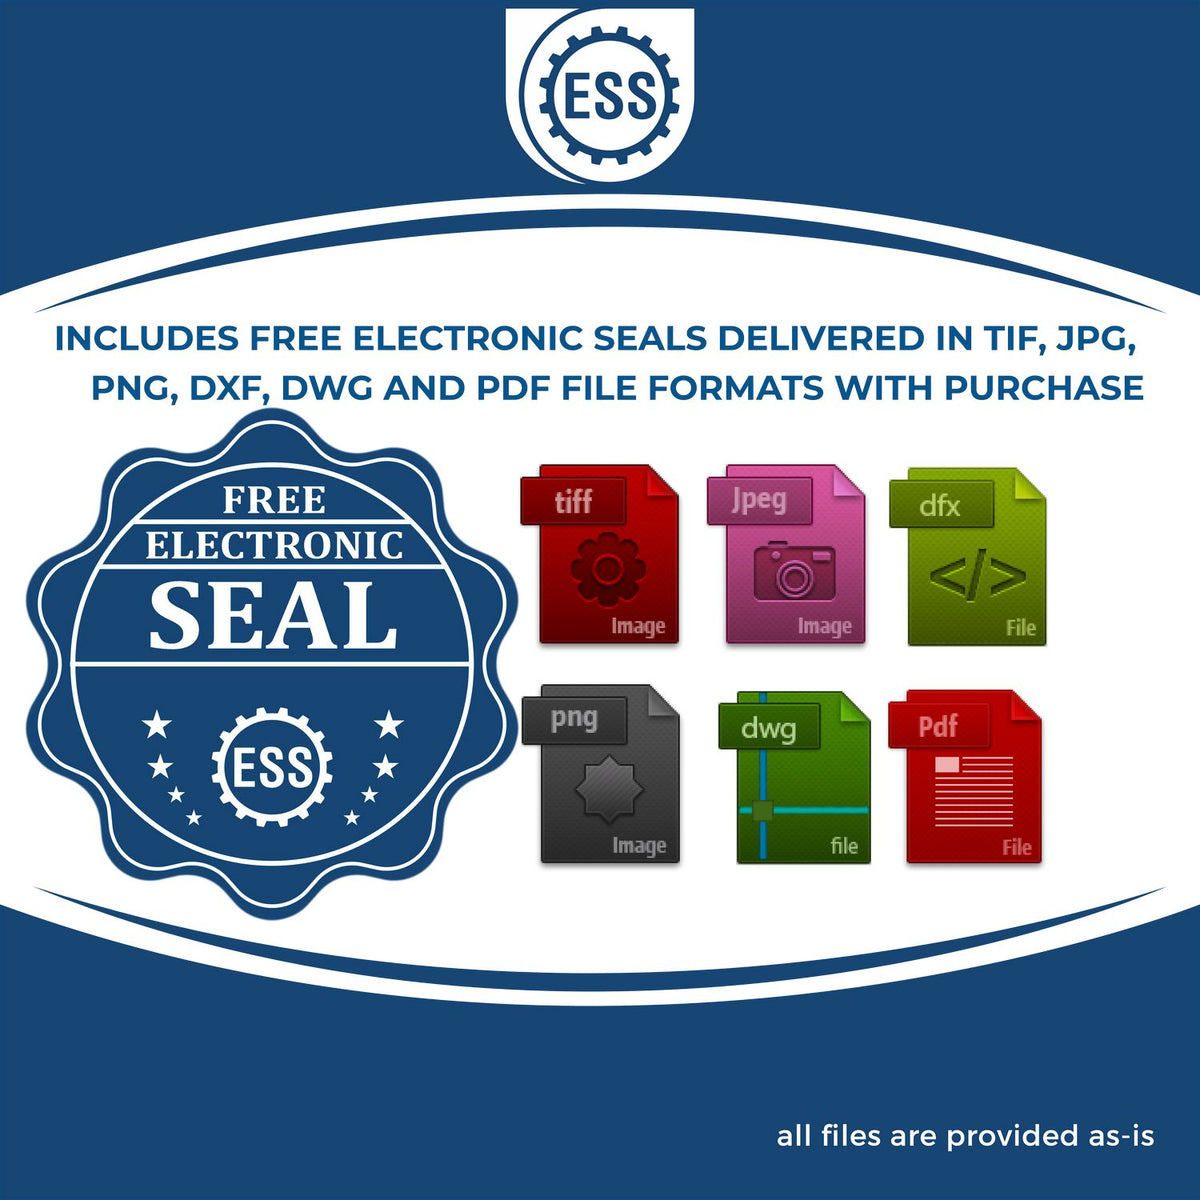 An infographic for the free electronic seal for the Hybrid Maine Geologist Seal illustrating the different file type icons such as DXF, DWG, TIF, JPG and PNG.